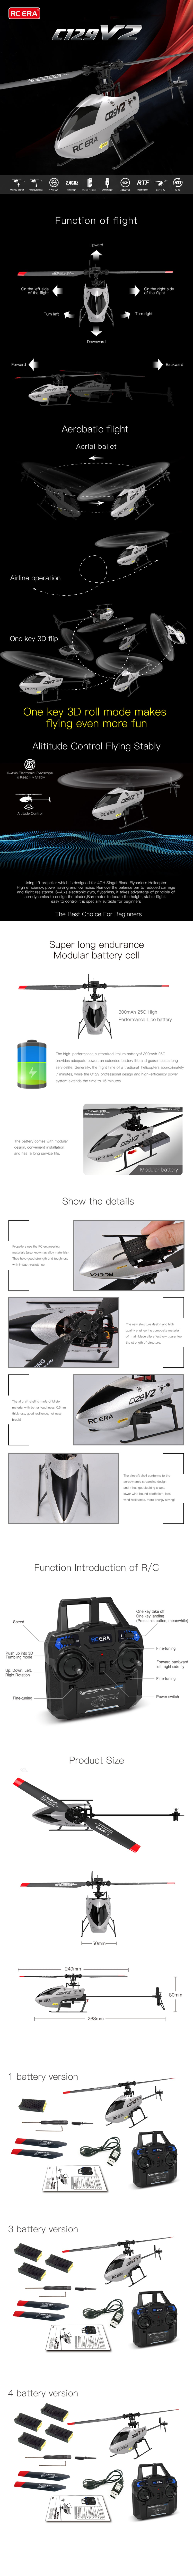 C129 V2 RC Helicopter, Aer atic flight ballet Airline One key 3D roll mode makes flying even more tun